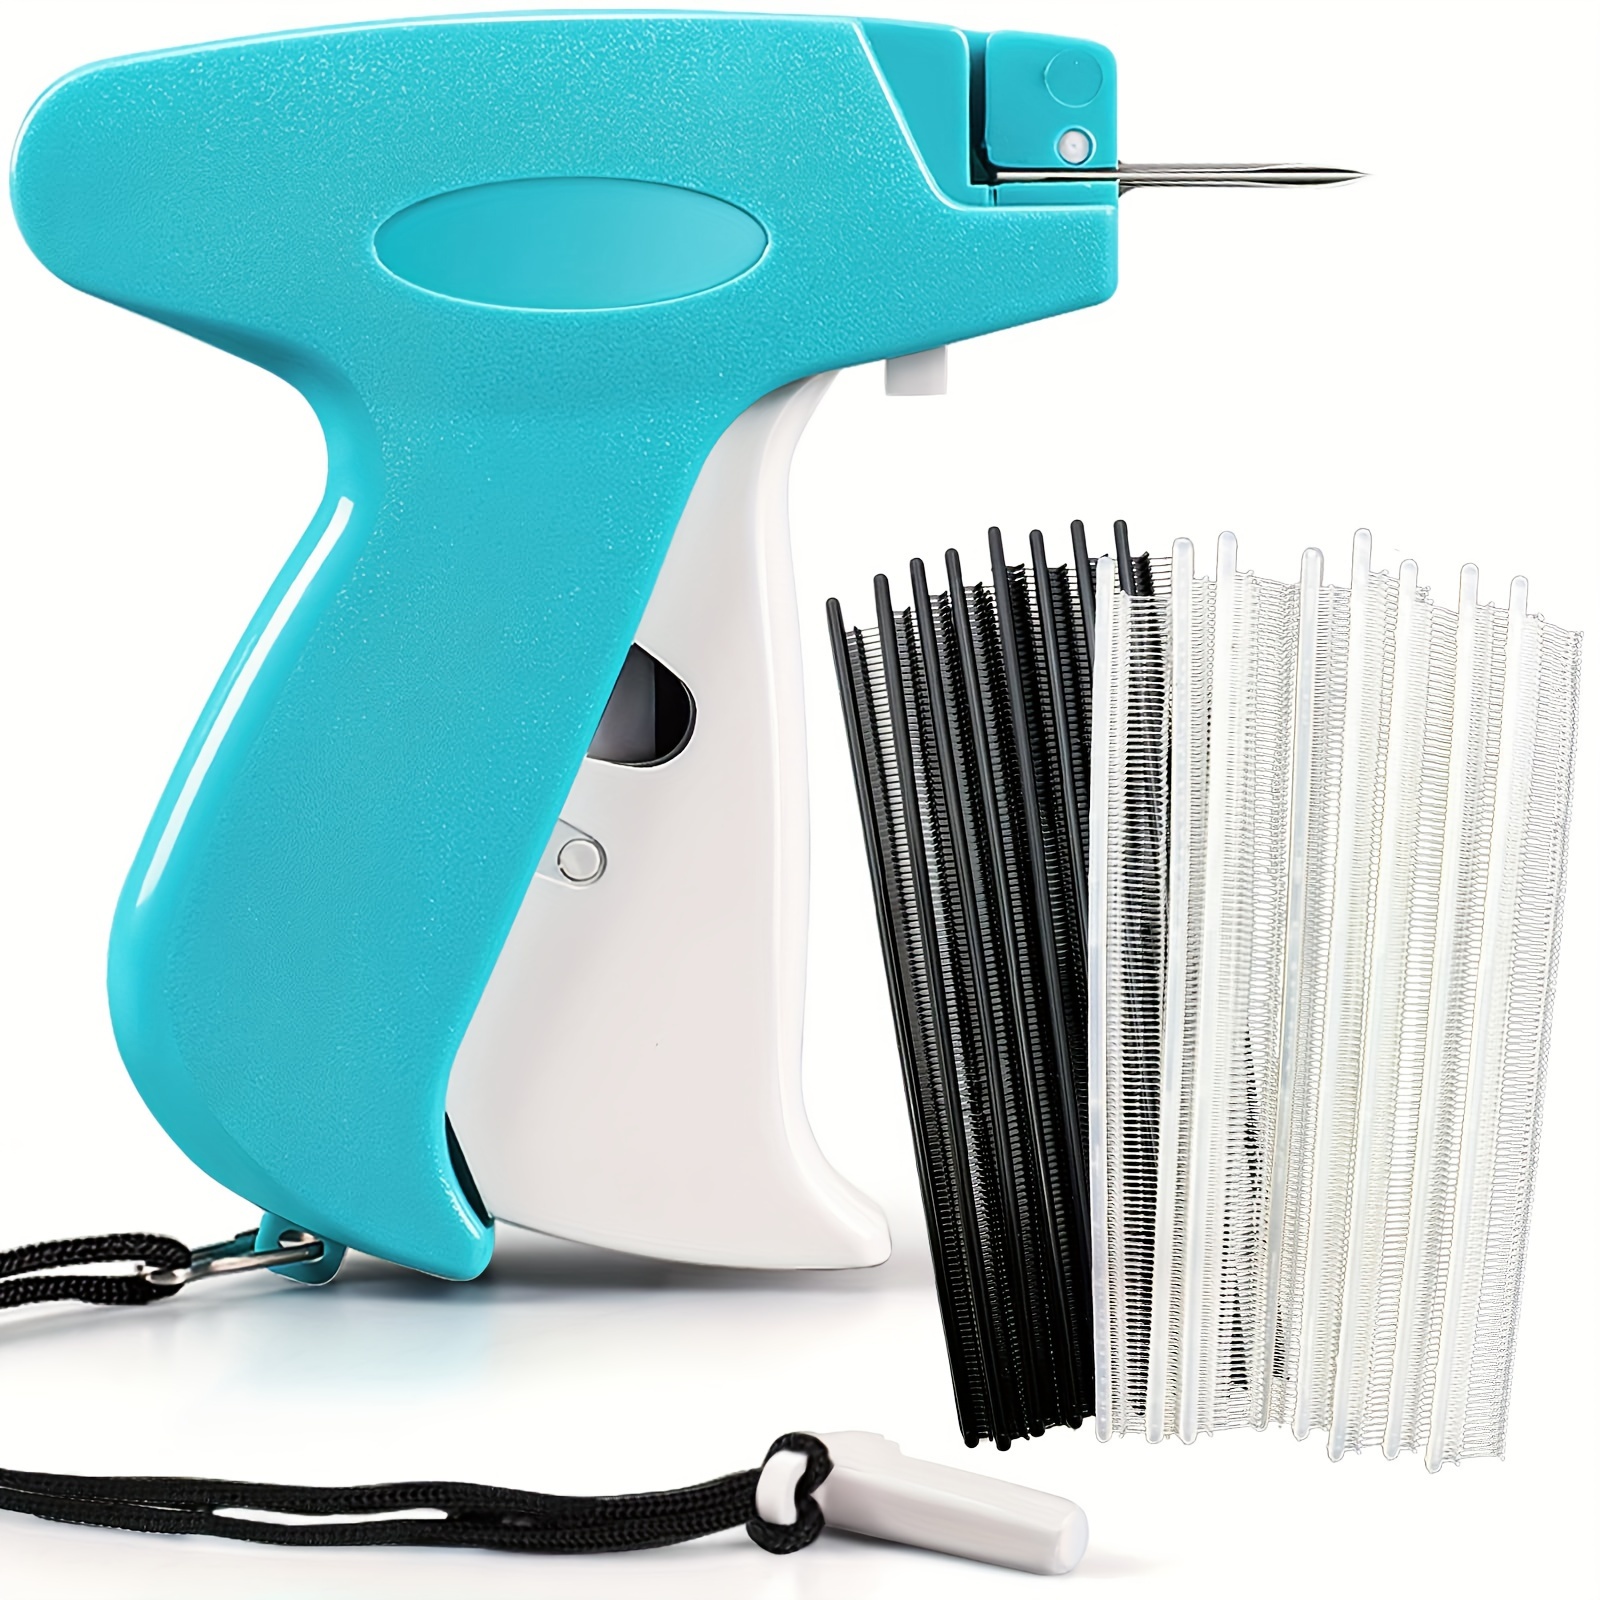 

1 Set Quick Clothes Fixer, Mini Sewing Gun For Clothes, Clothes Sewing Label Gun, Quick Sewing Seam Gun, Sewing Tool With 2 Needles, 1500 Black And 1500 White Fasteners